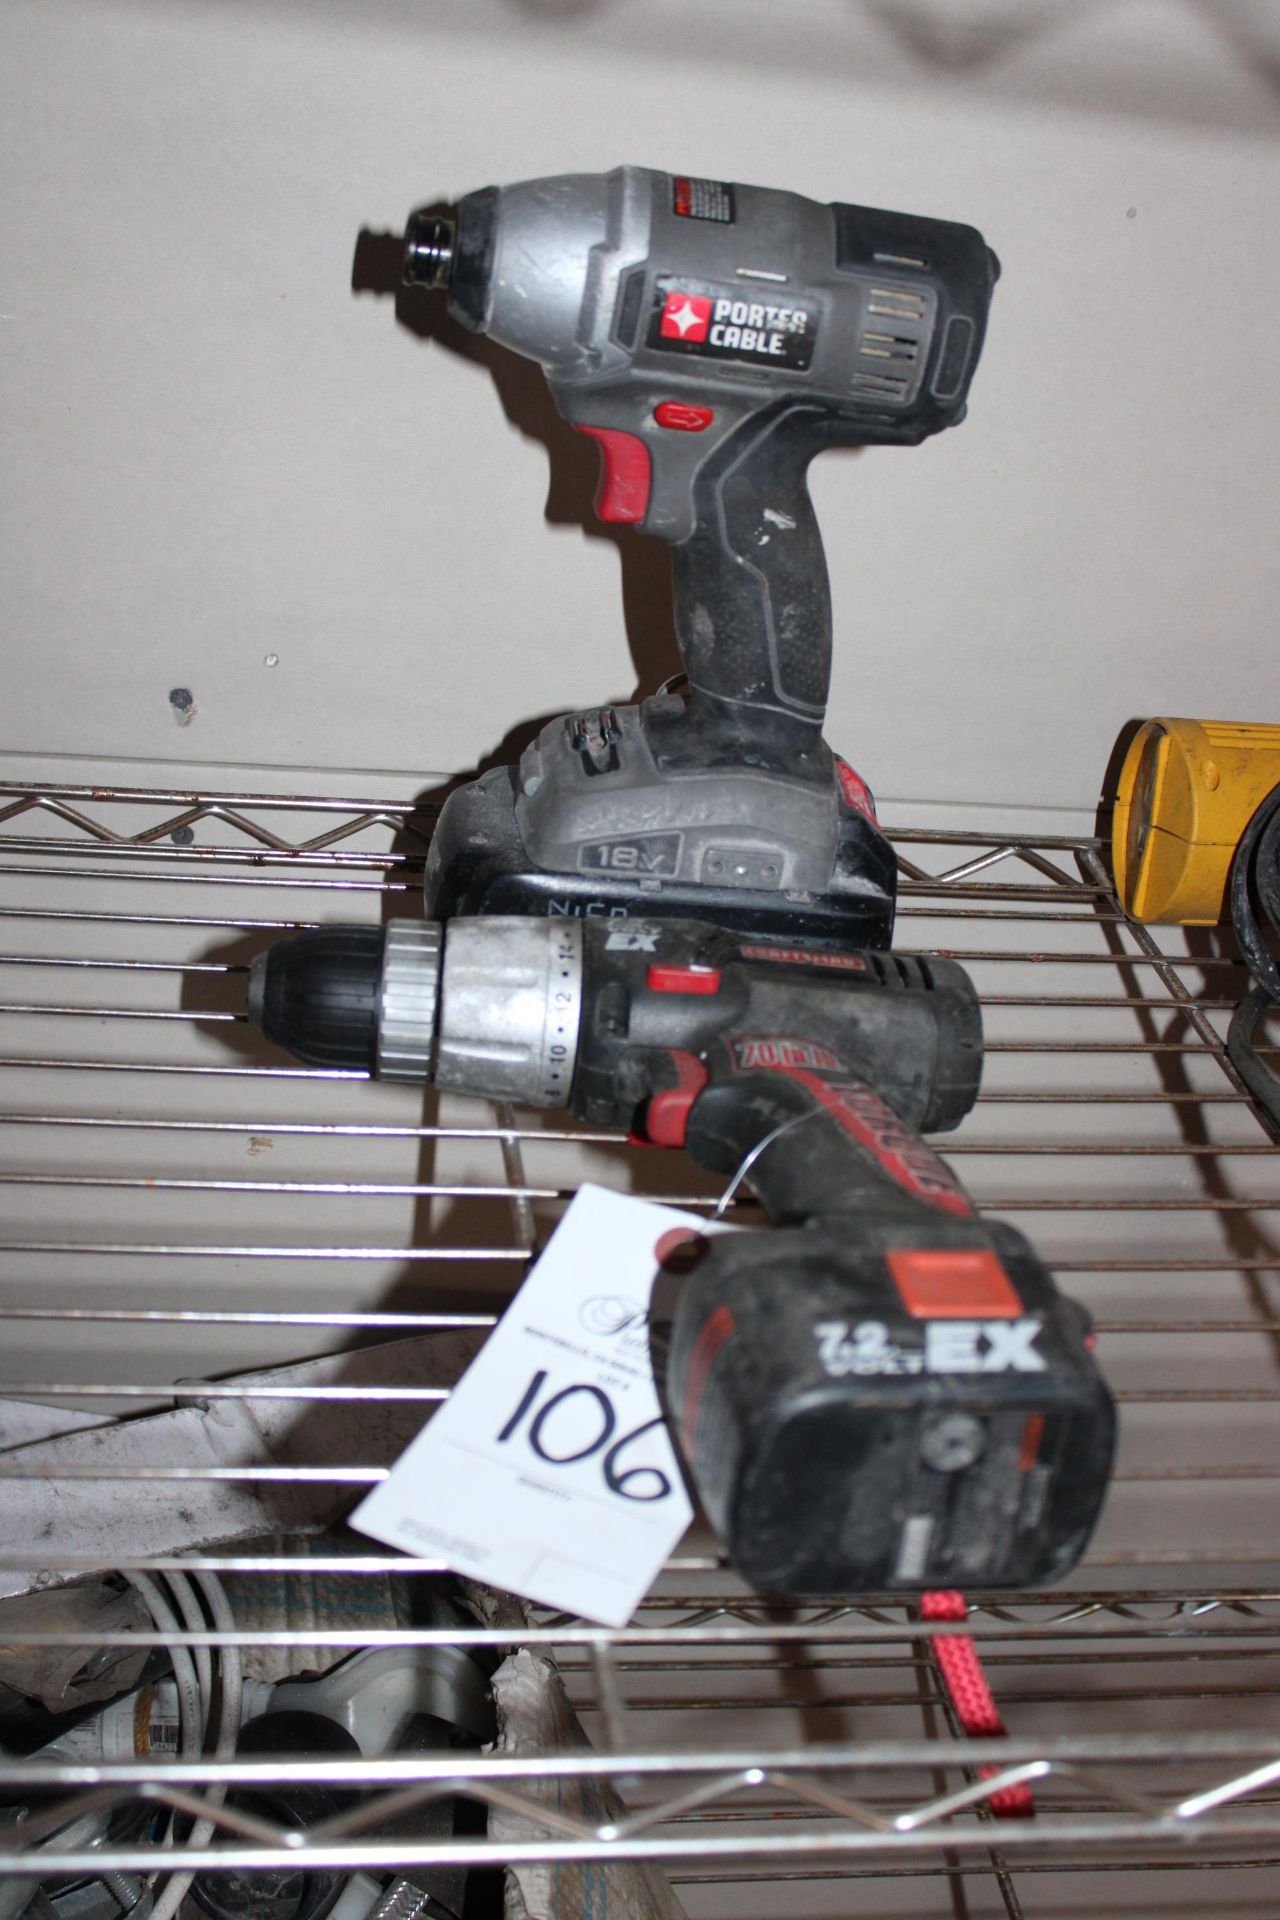 ASSORTED POWER TOOLS